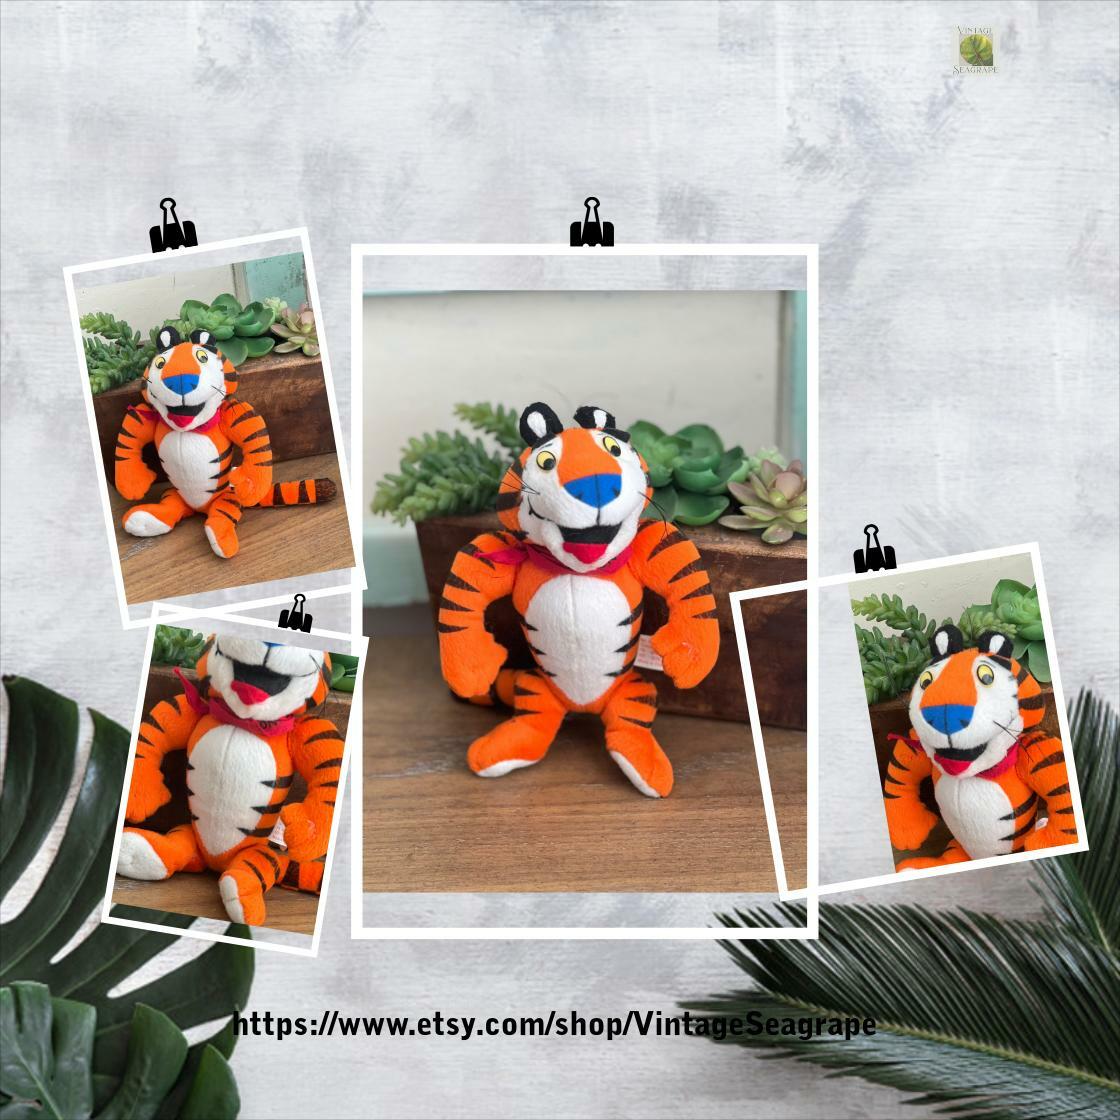 Sleek sellouts! 🤓. Order Tony the Tiger Plush Toy, Kids Cereal Mascot, Kelloggs, Vintage Stuffed Animal, Vintage Toy, Retro Toy, Vintage Plush Toy, Gift for Child at $20.00 from etsy.com/listing/148112… #VintageToys #CollectableToys